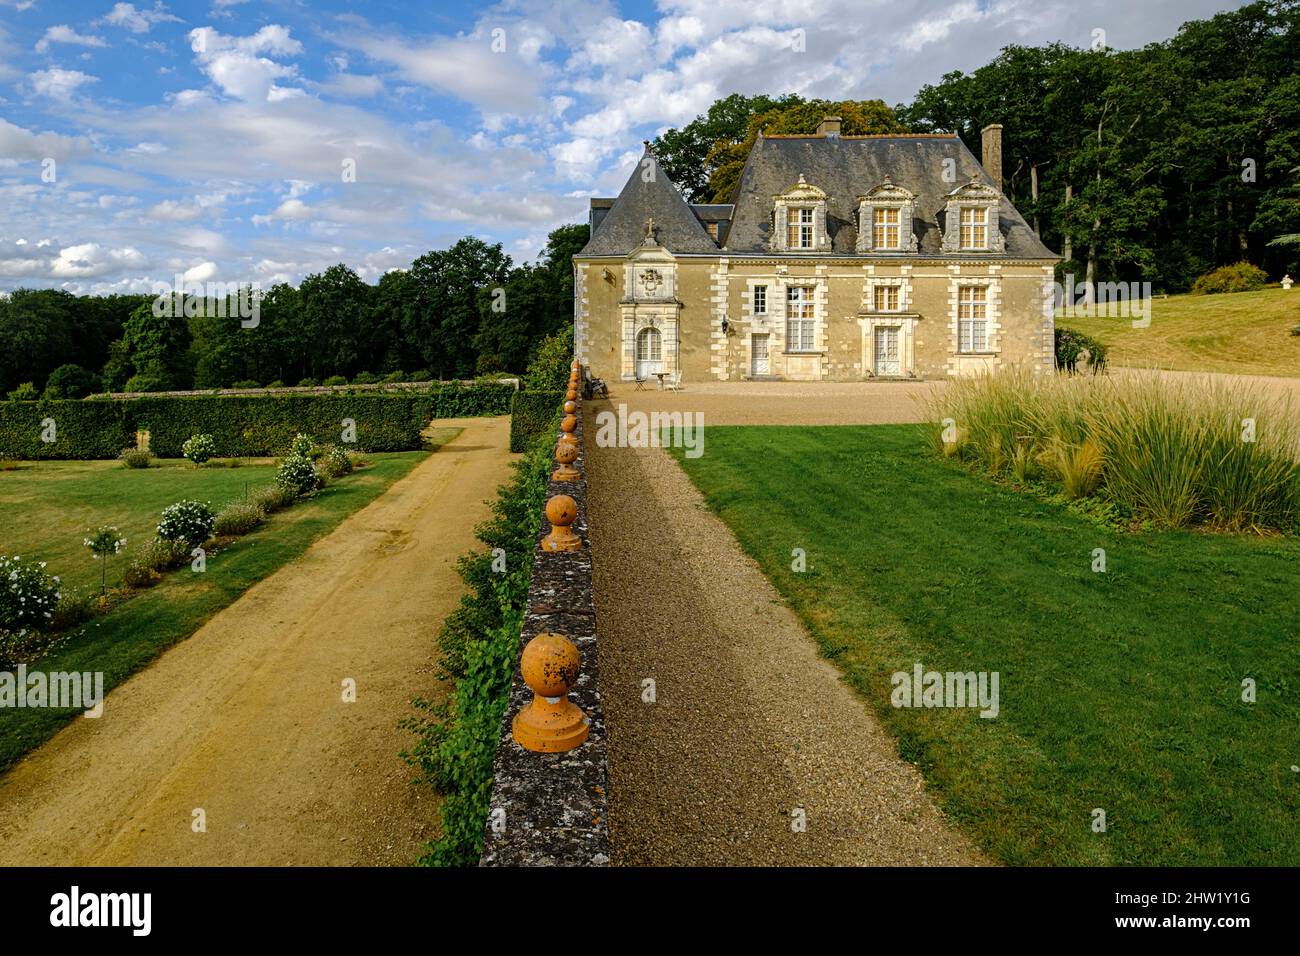 France, Indre et Loire, Loire Valley, Chan?ay, Castle and Gardens of Valmer, 16 th century, renaissance style Stock Photo